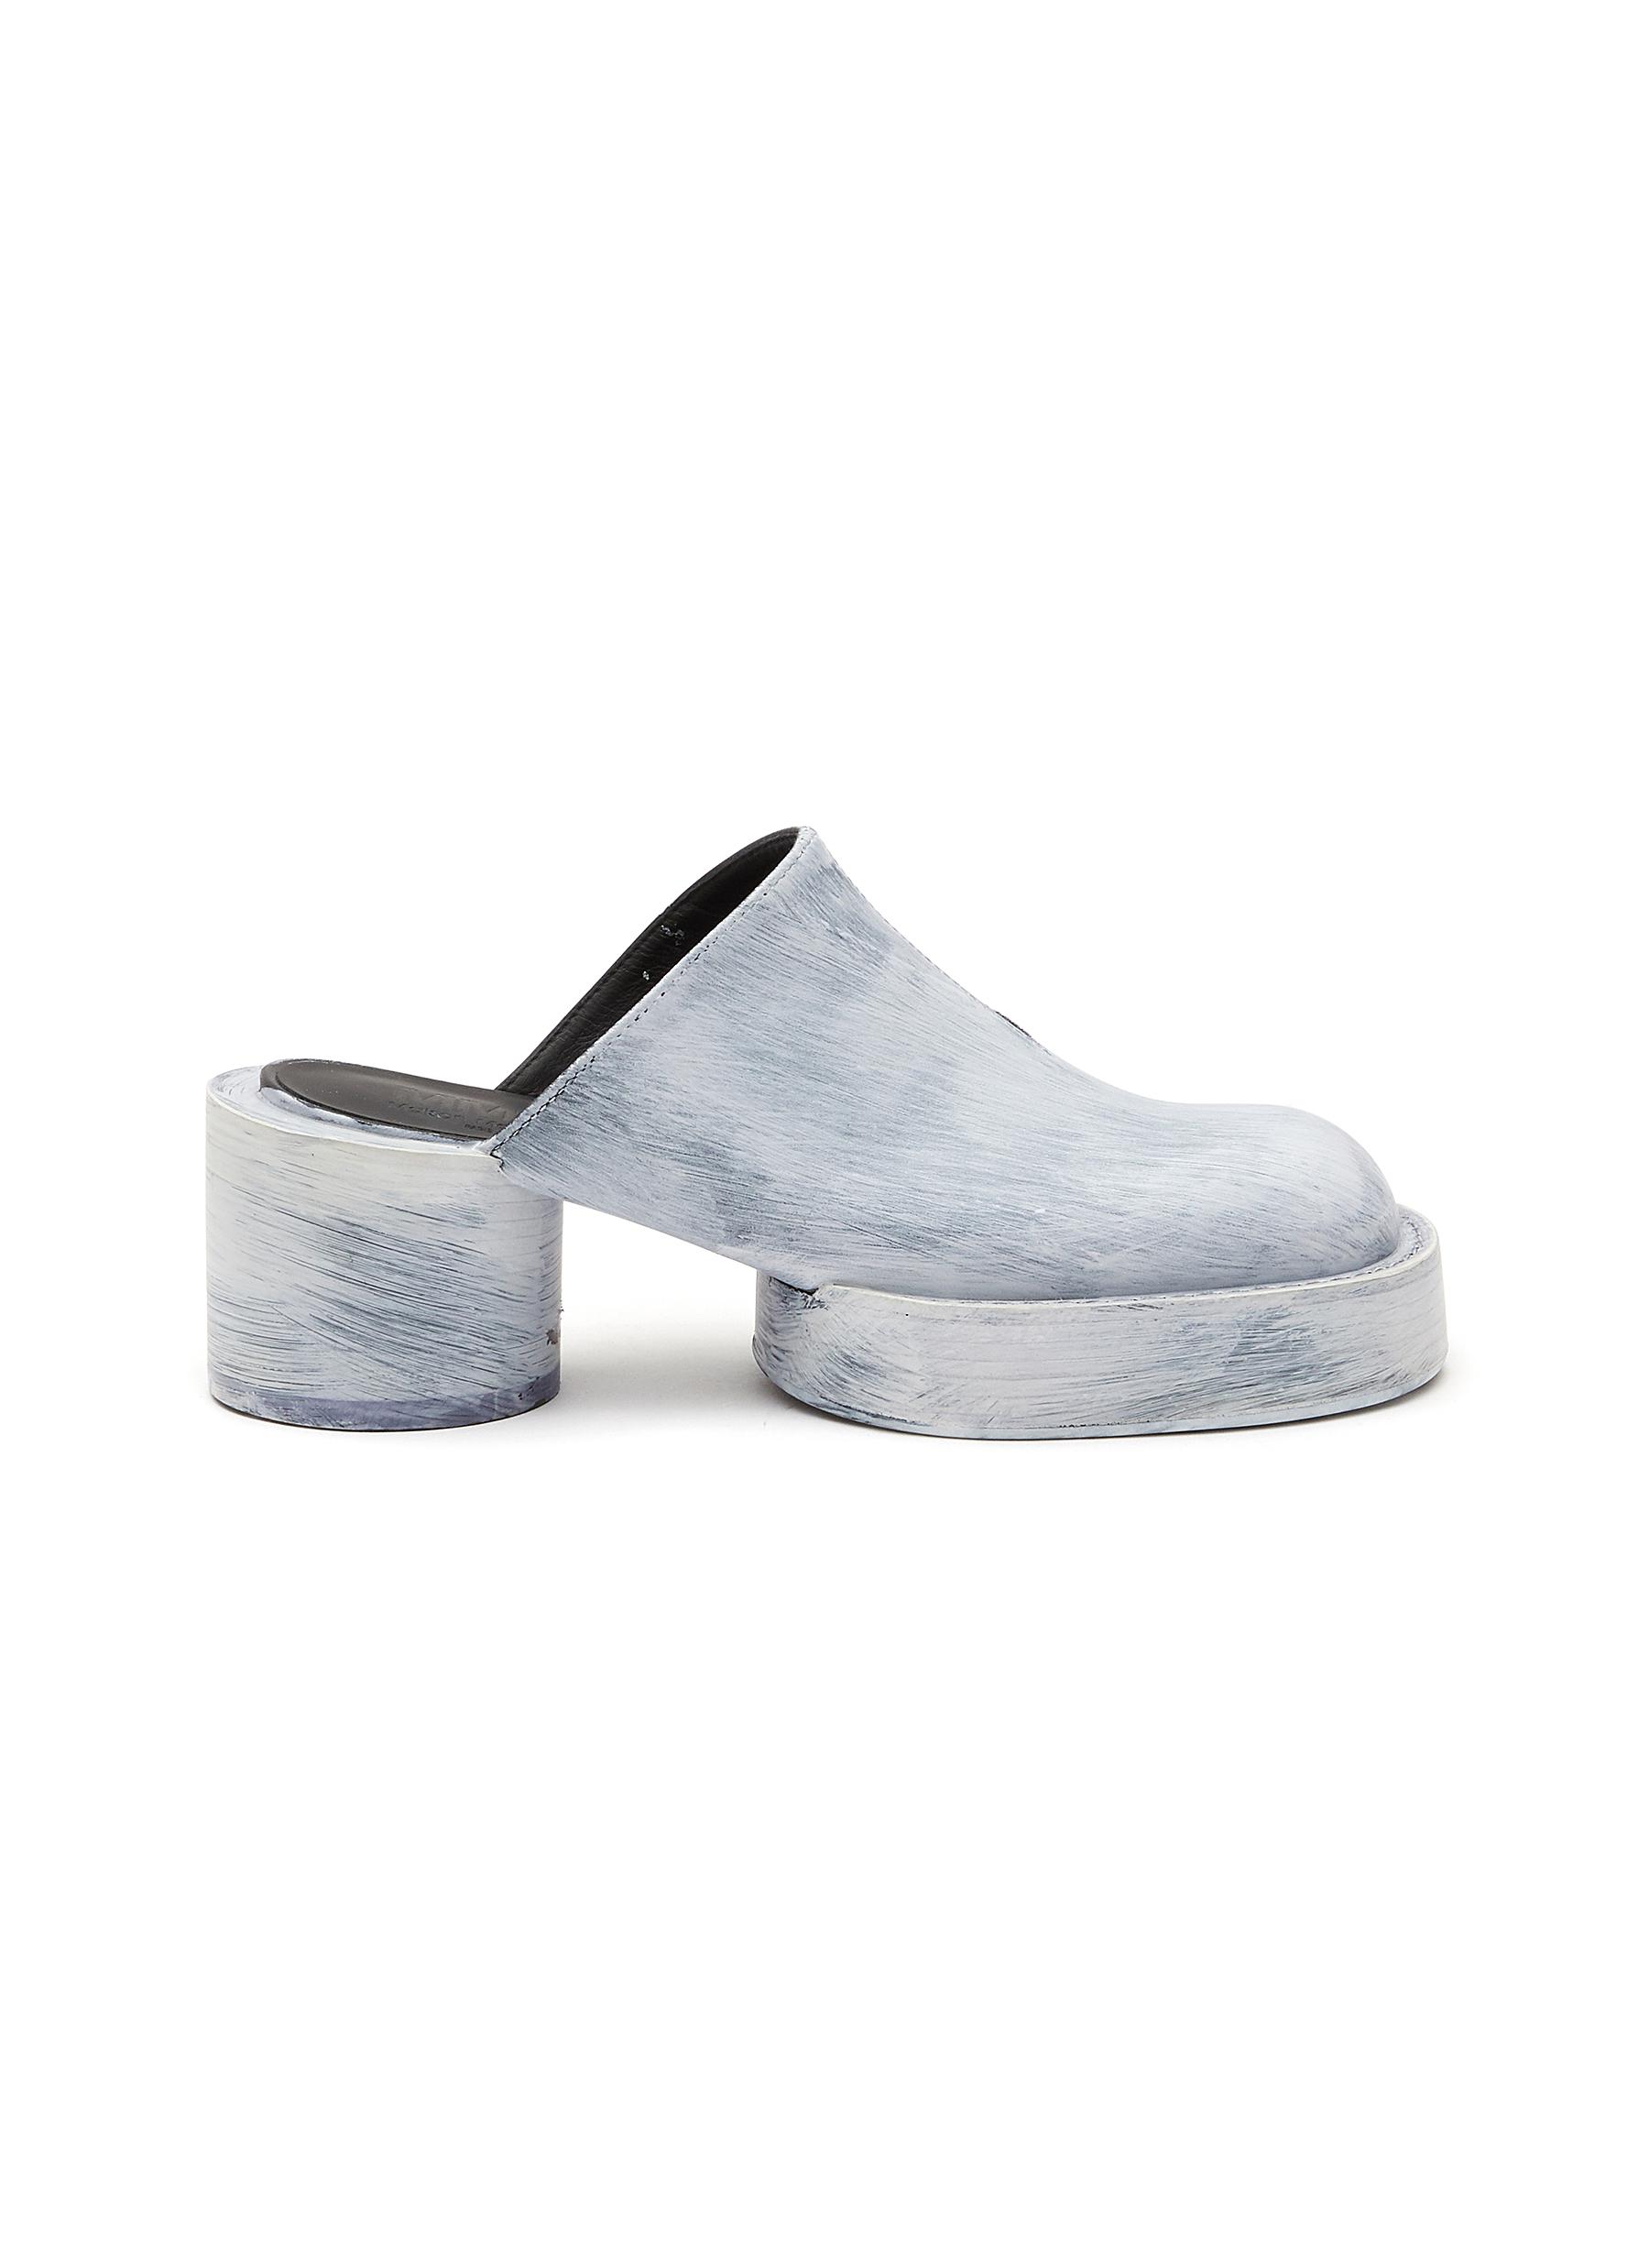 Block heel square toe painted leather mules